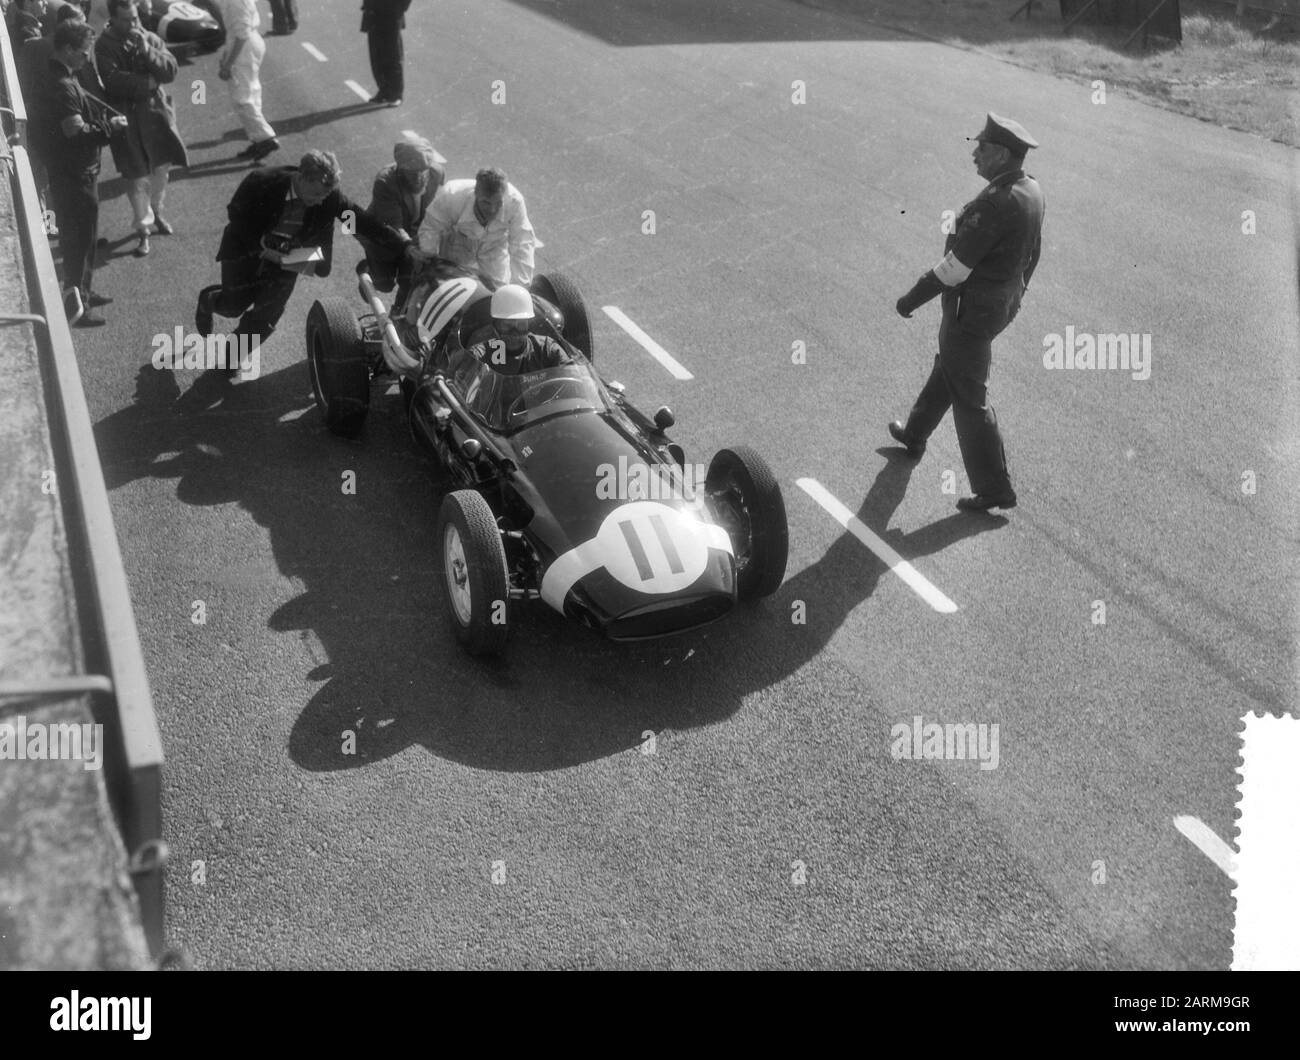 Grand Prix Zandvoort 1959  Training at the Circuit Van Zandvoort of the Grand Prix, Stirling Moss starts for a training round Date: May 29, 1959 Location: Noord-Holland, Zandvoort Keywords: cars, motor racing, circuits, sports Person name: Moss, Stirling Stock Photo